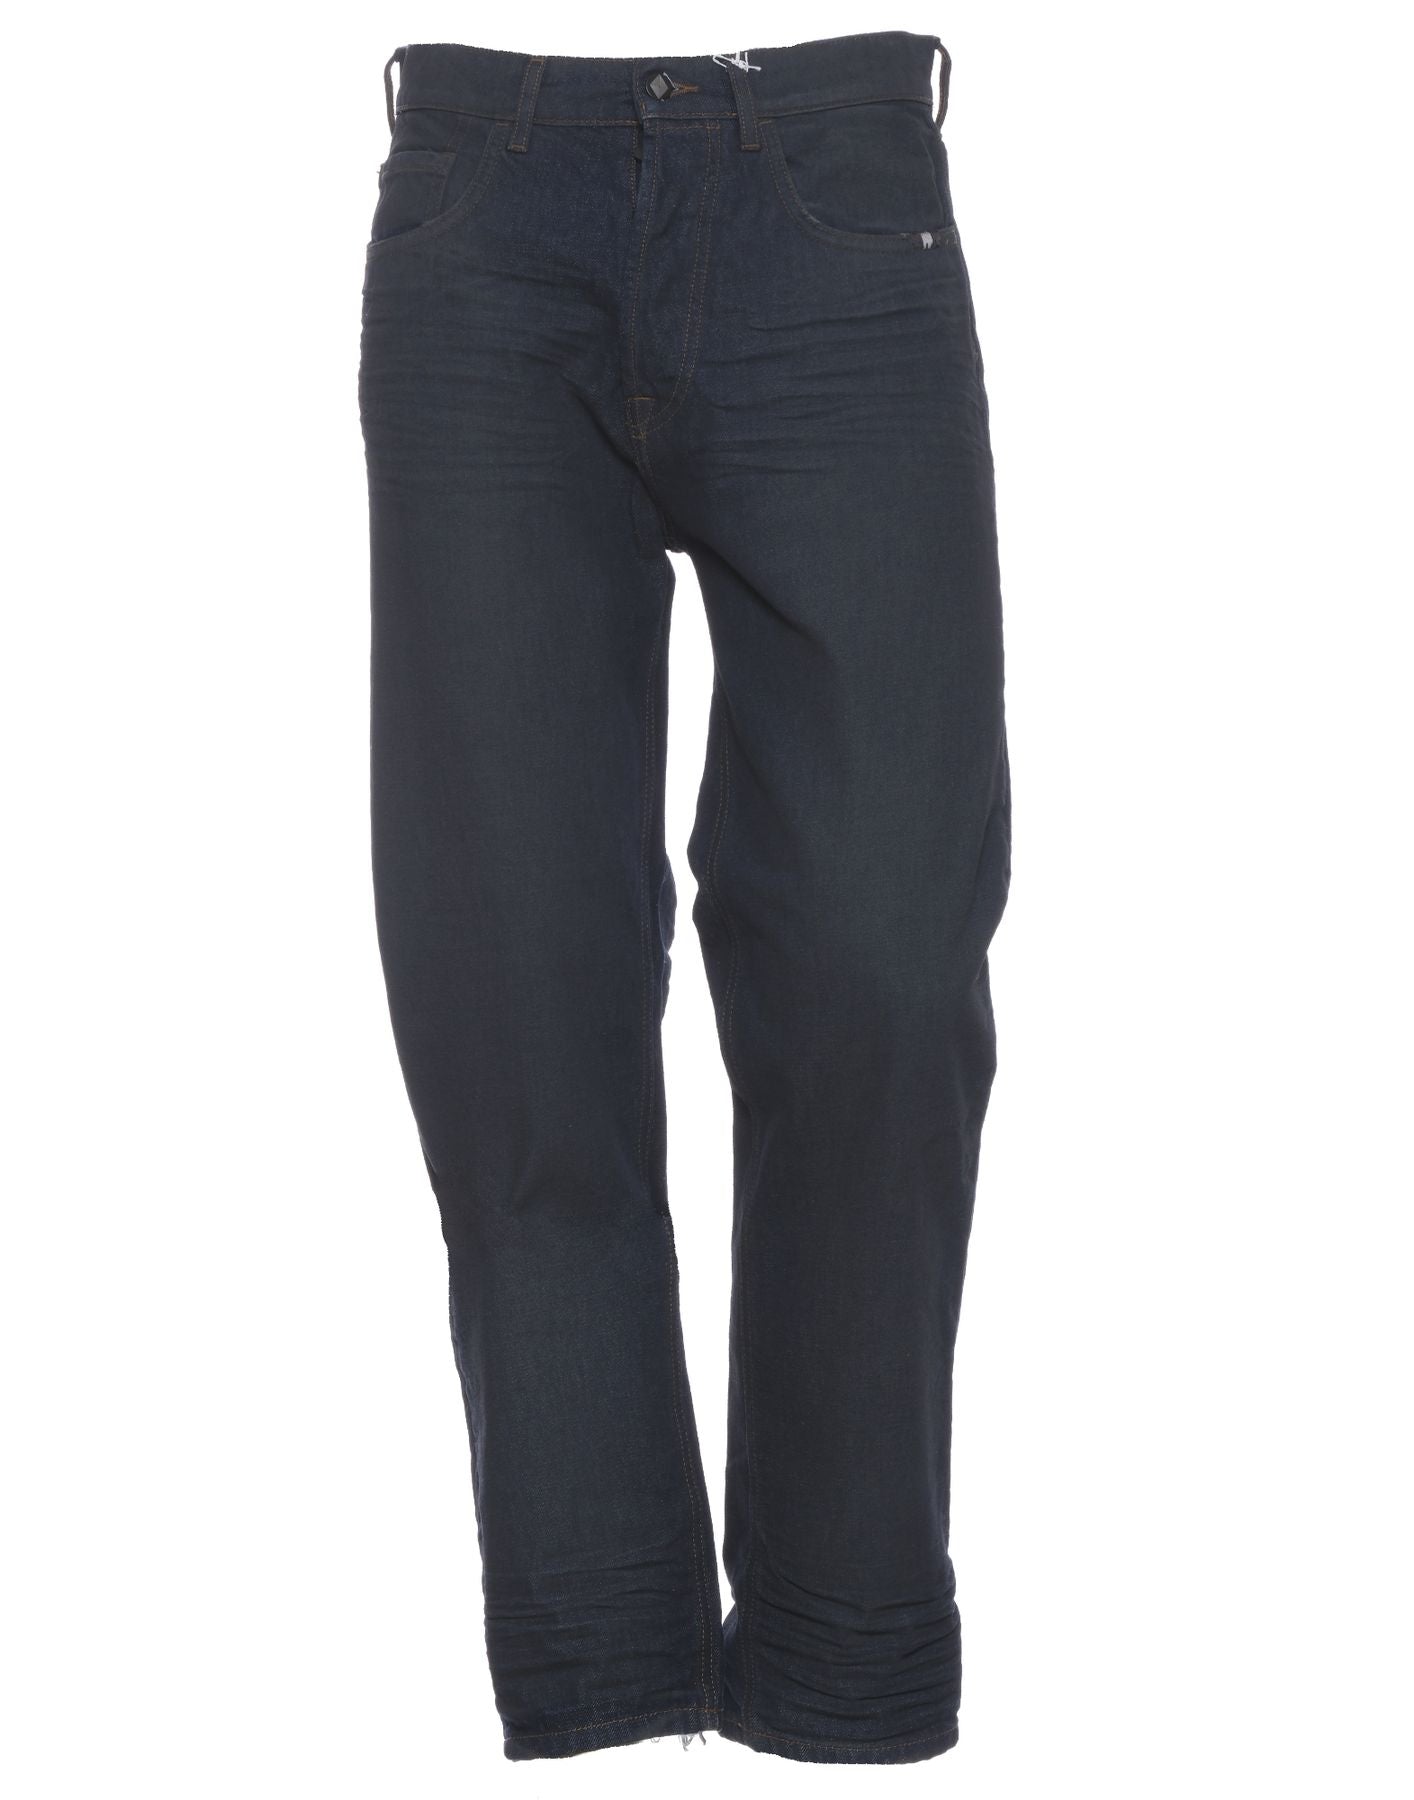 Jeans for man AMU042D5702371 999 Amish